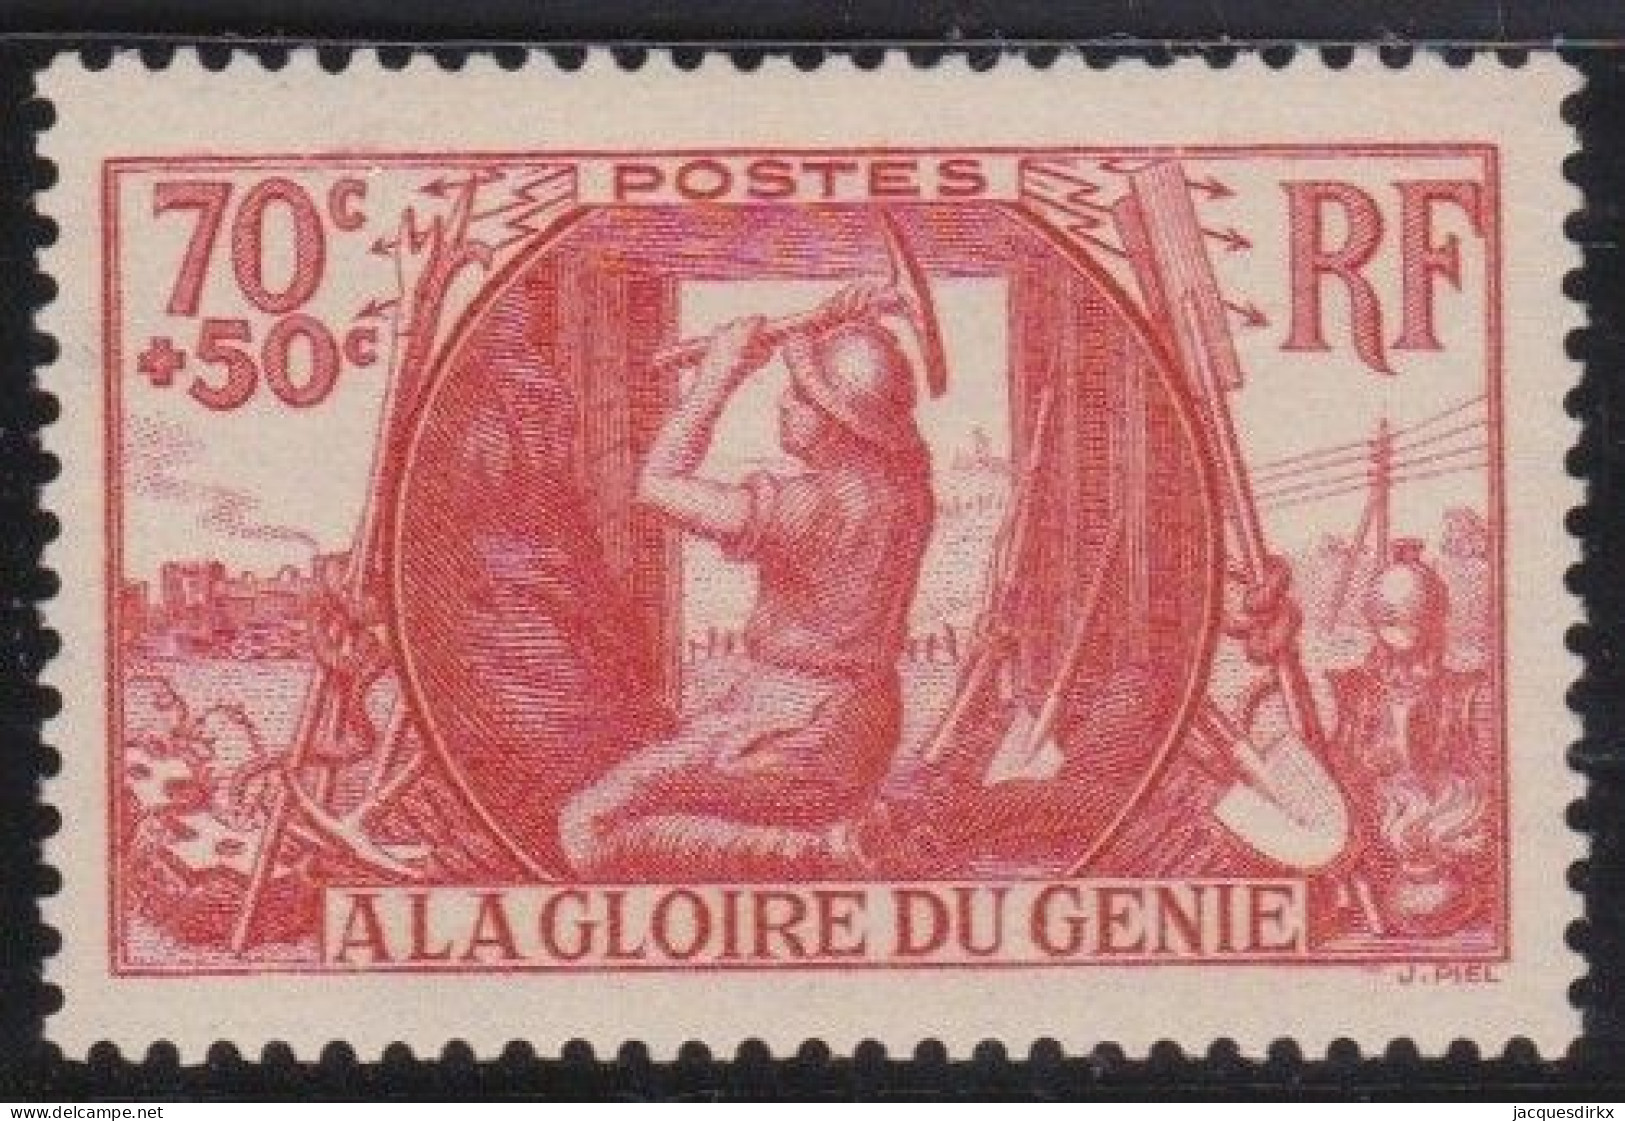 France  .  Y&T   .  423    .     *       .     Neuf Avec Gomme - Unused Stamps